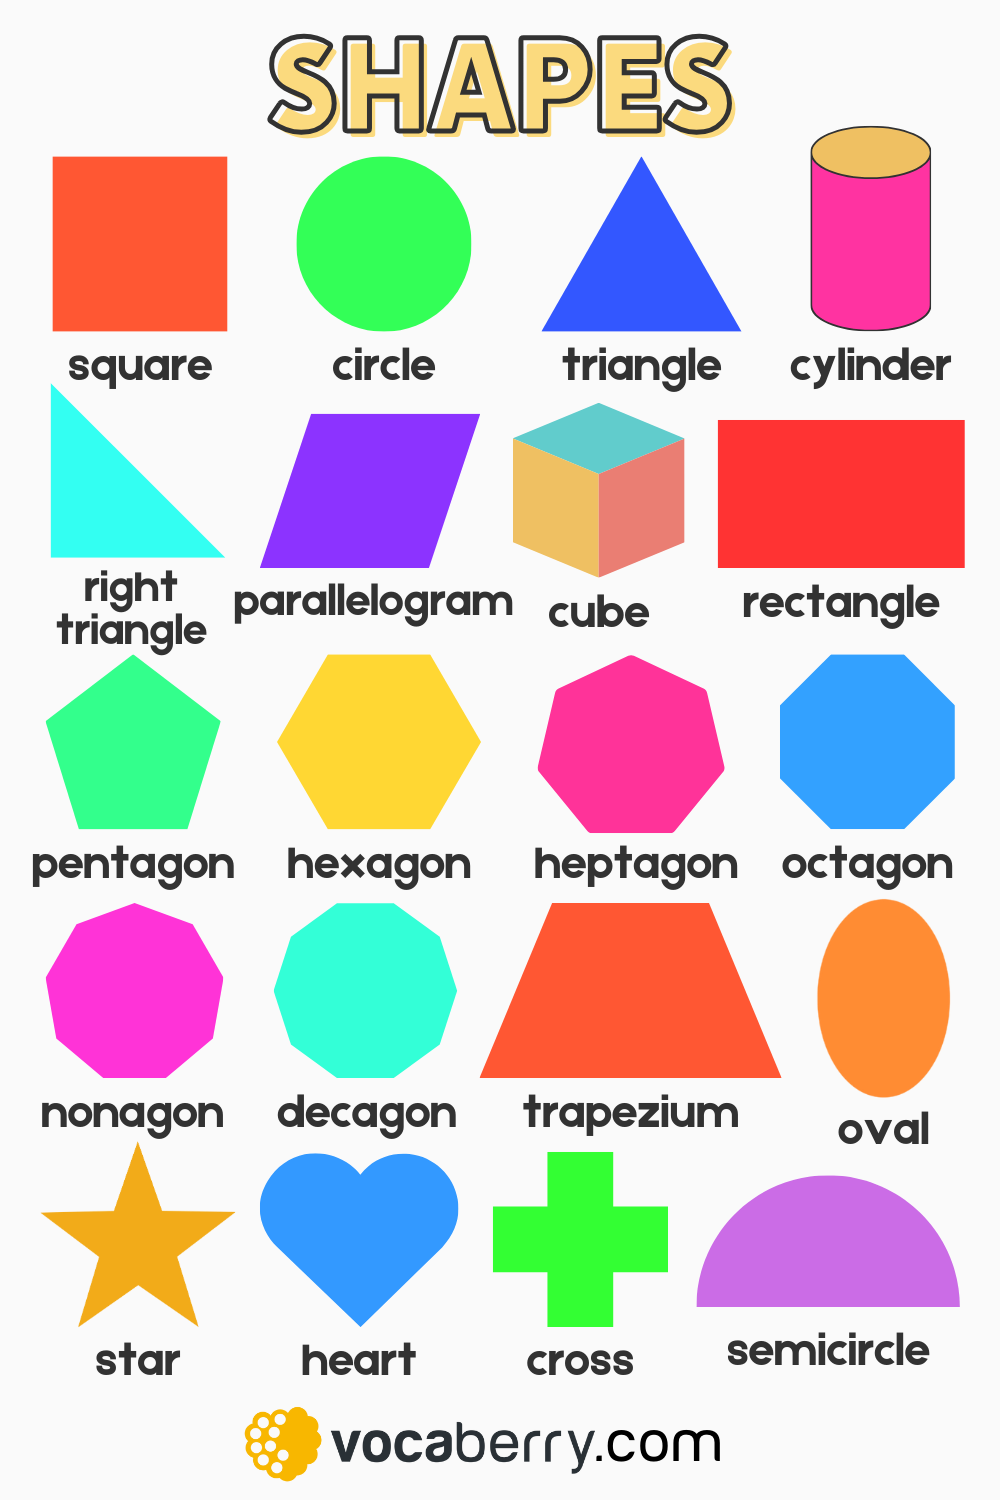 shapes-vocabulary-learn-english-vocabulary-lesson-geometric-shapes-in-english-esl